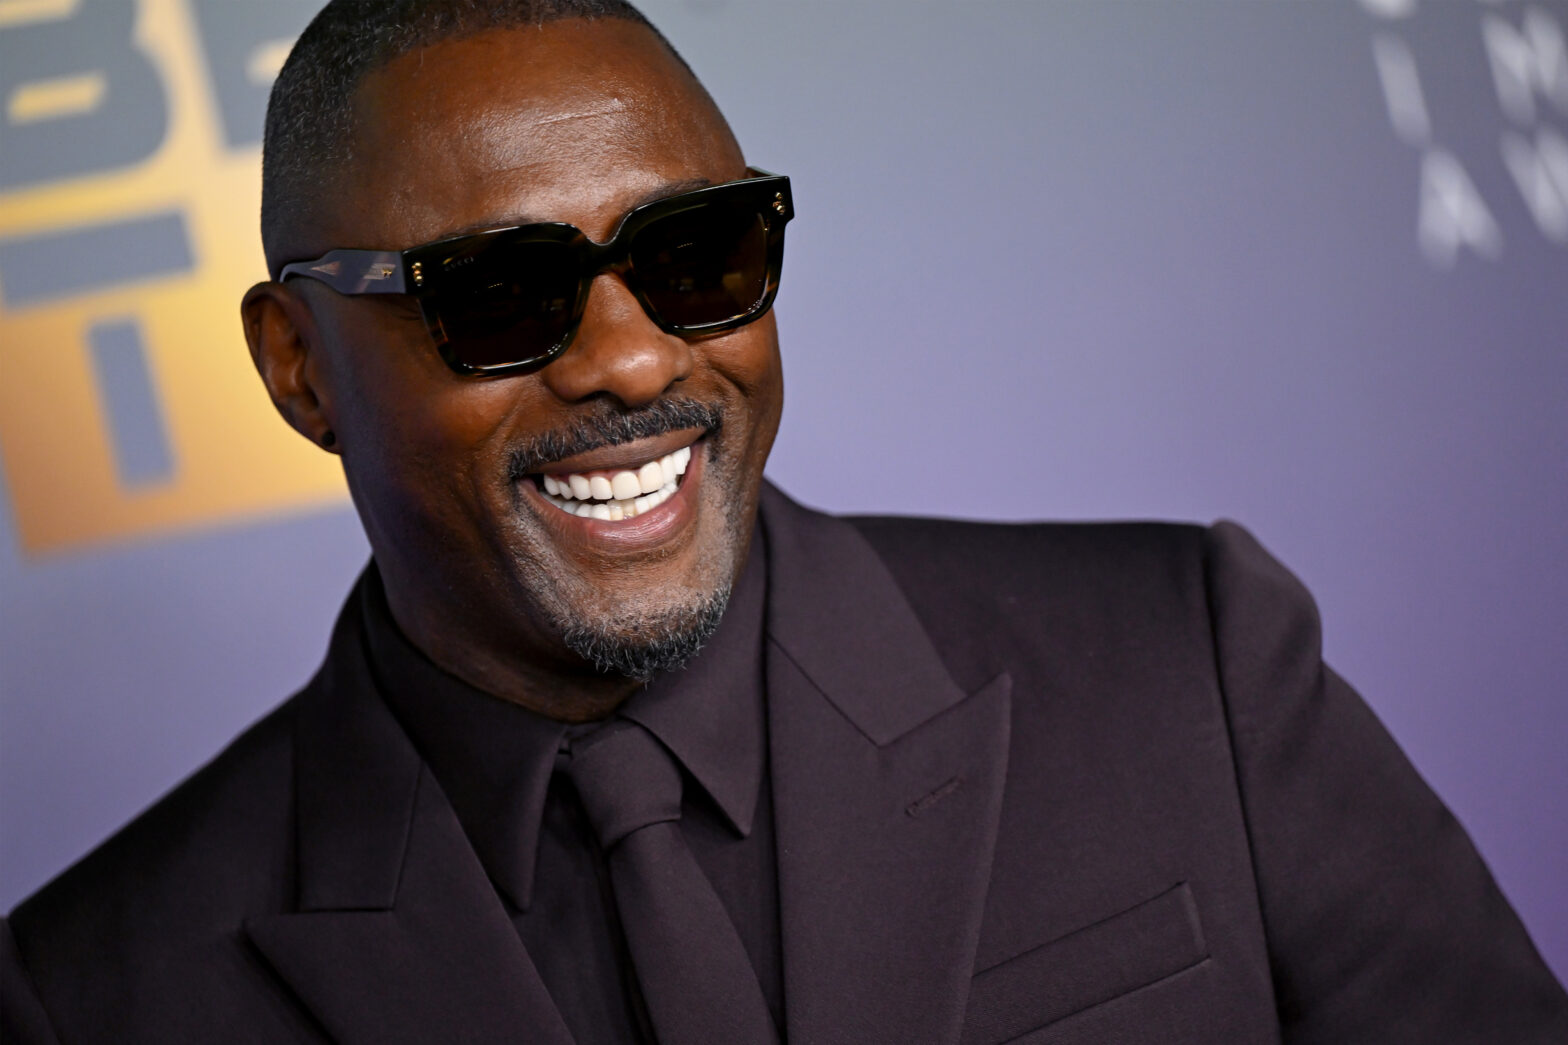 Idris Elba Reveals Dream To Build An Eco-City In His Father's Country